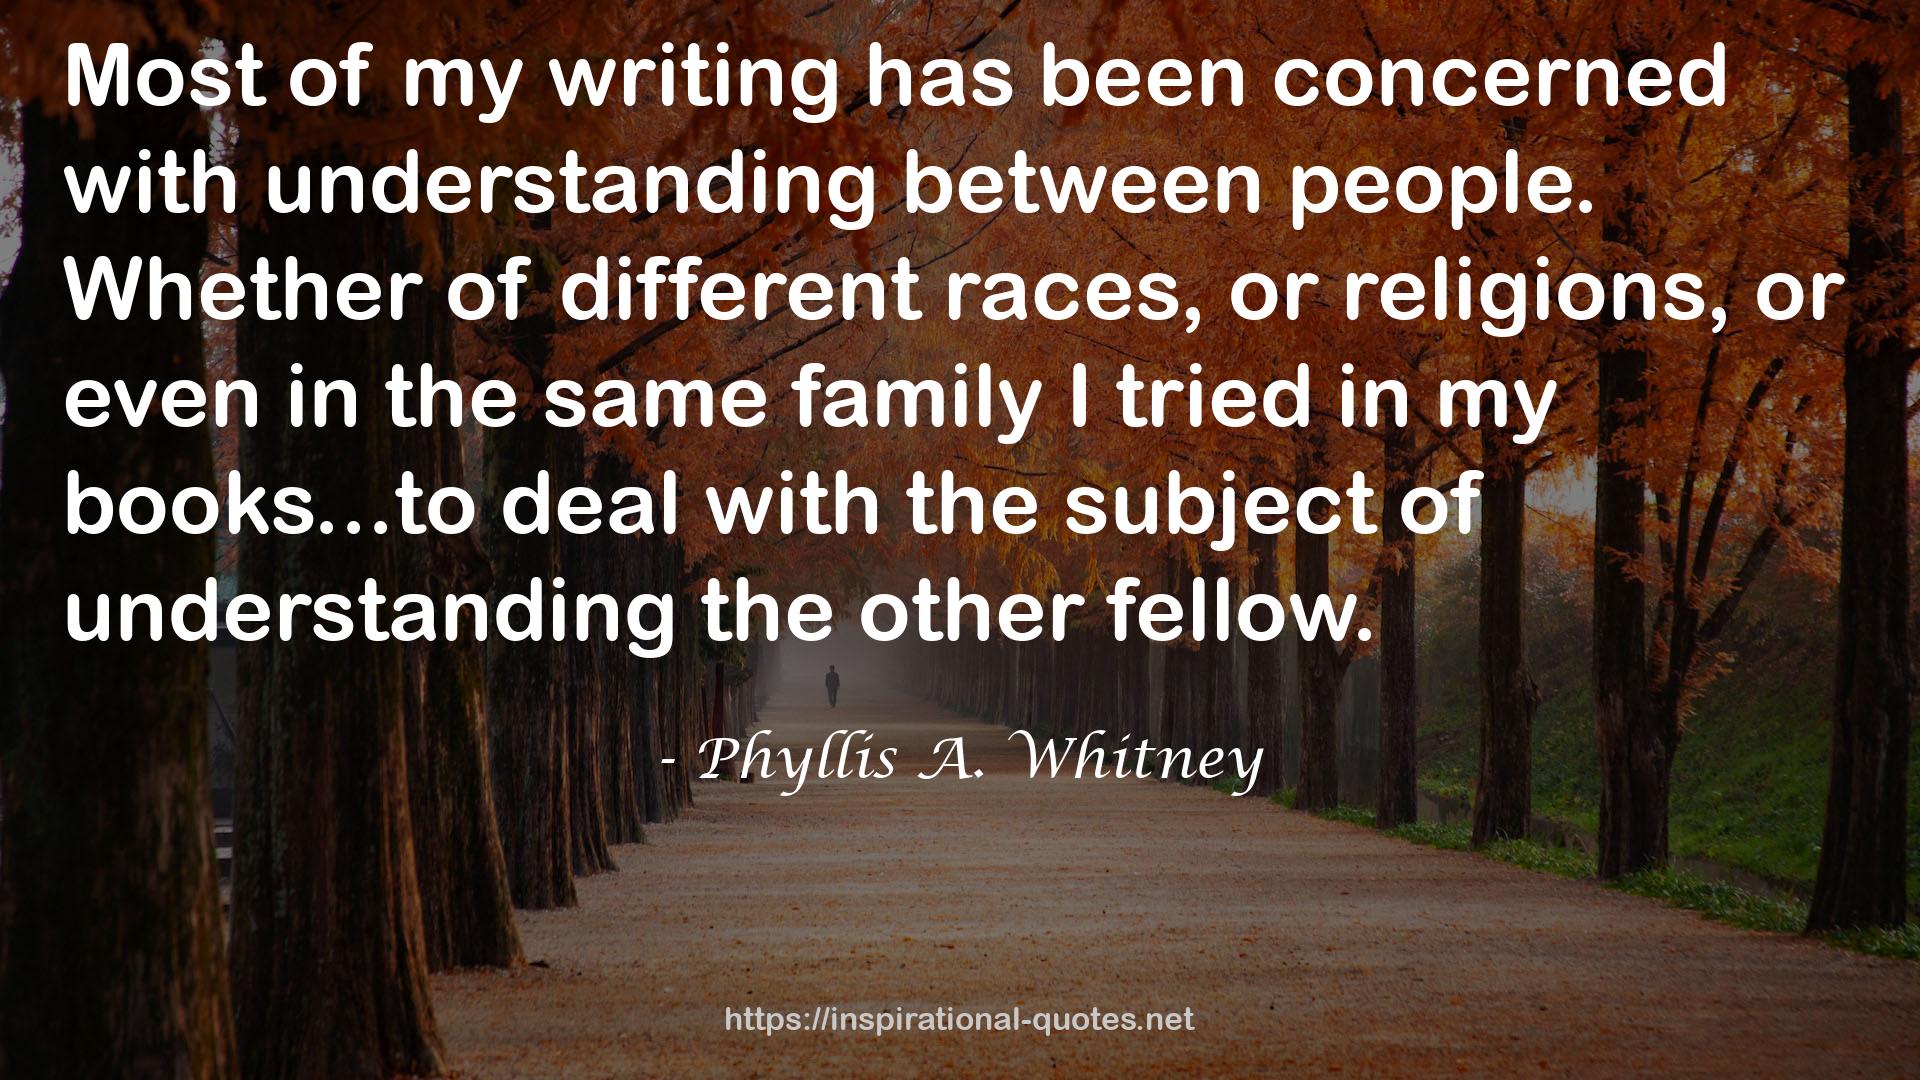 Phyllis A. Whitney QUOTES